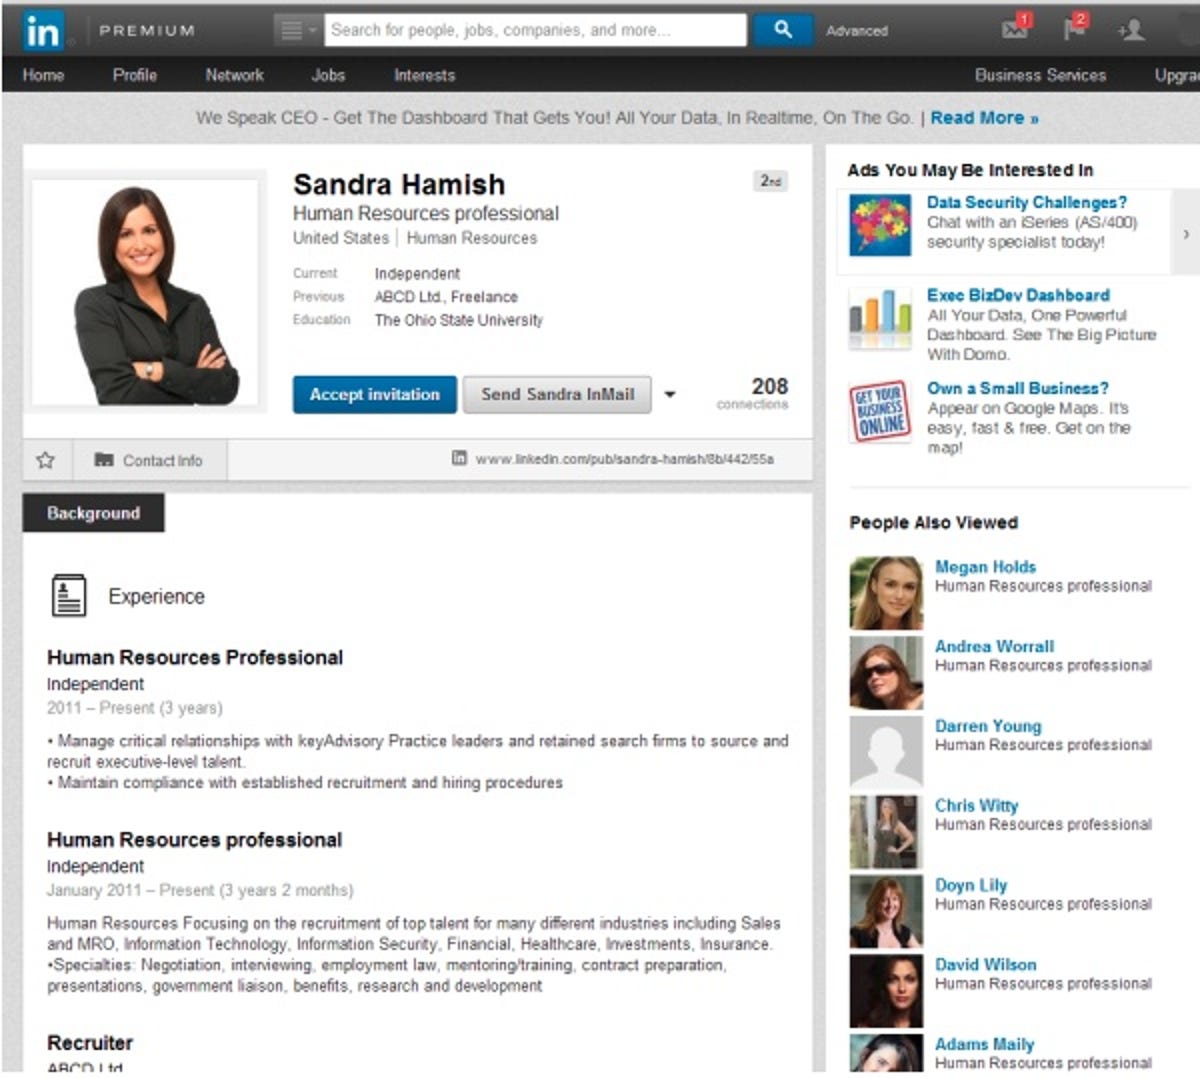 An example of a fake job recruiter profile posted to LinkedIn.